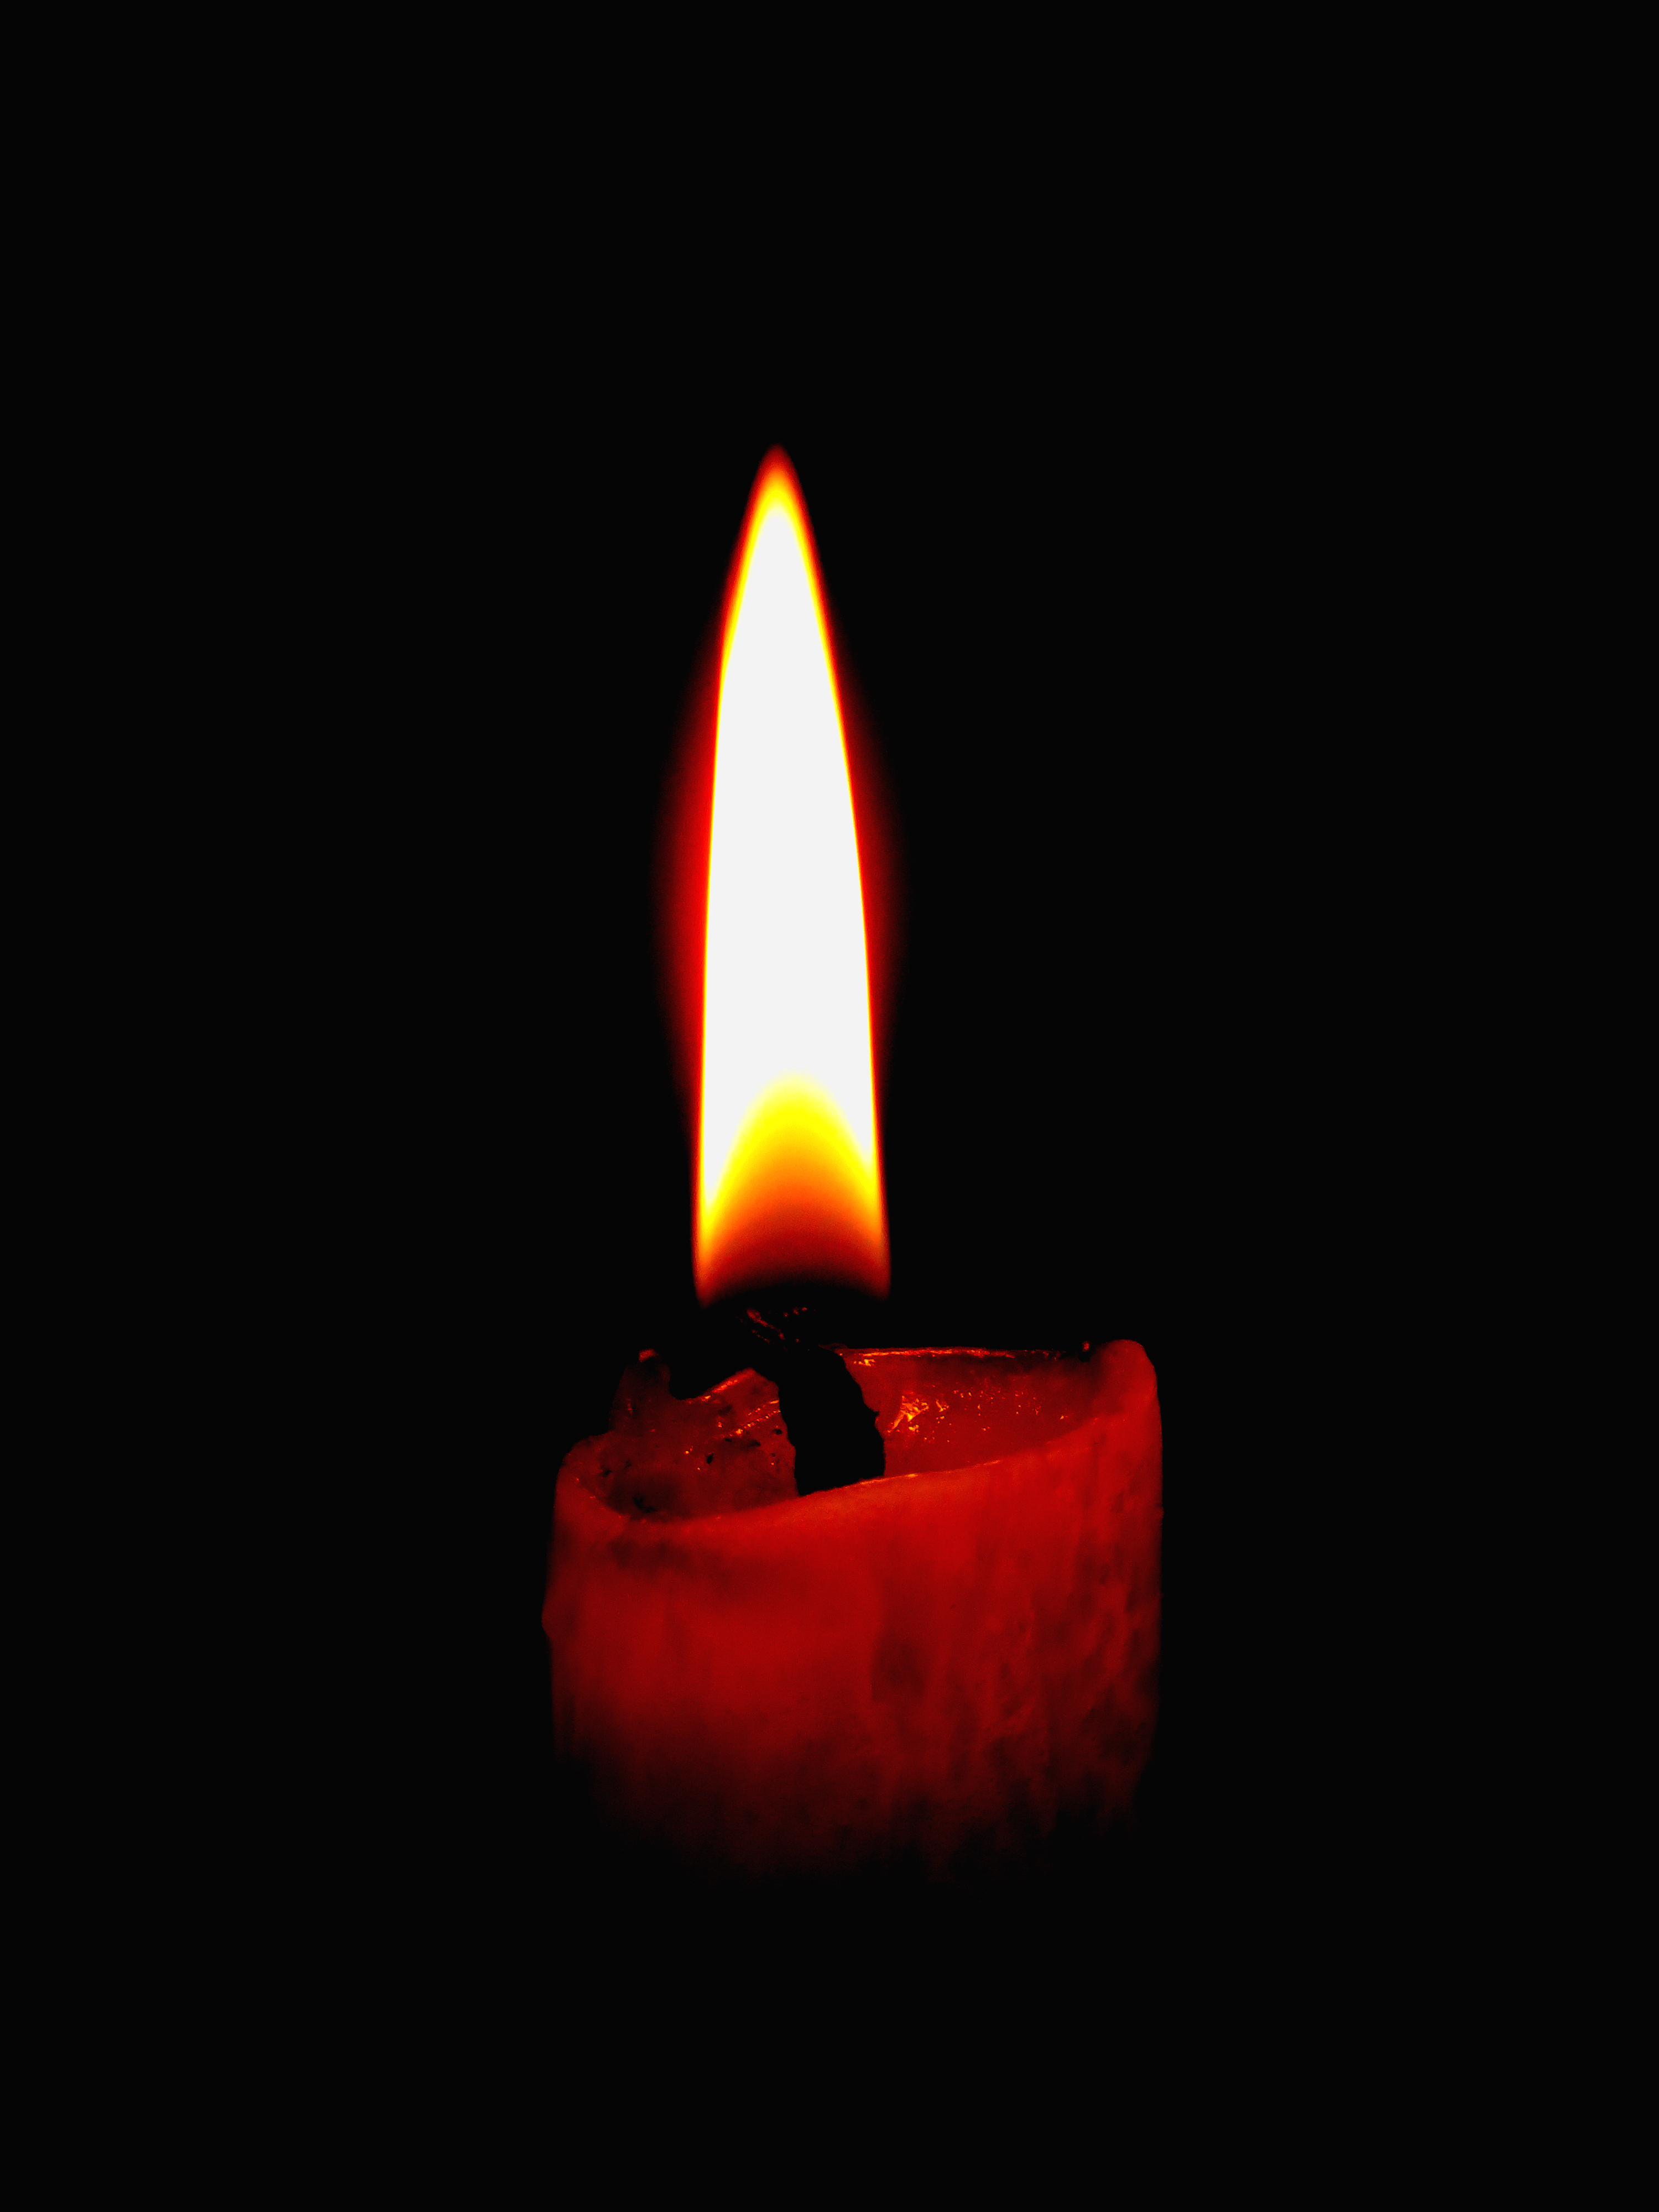 wax, red, dark, flame, dark background, candle, wick for android